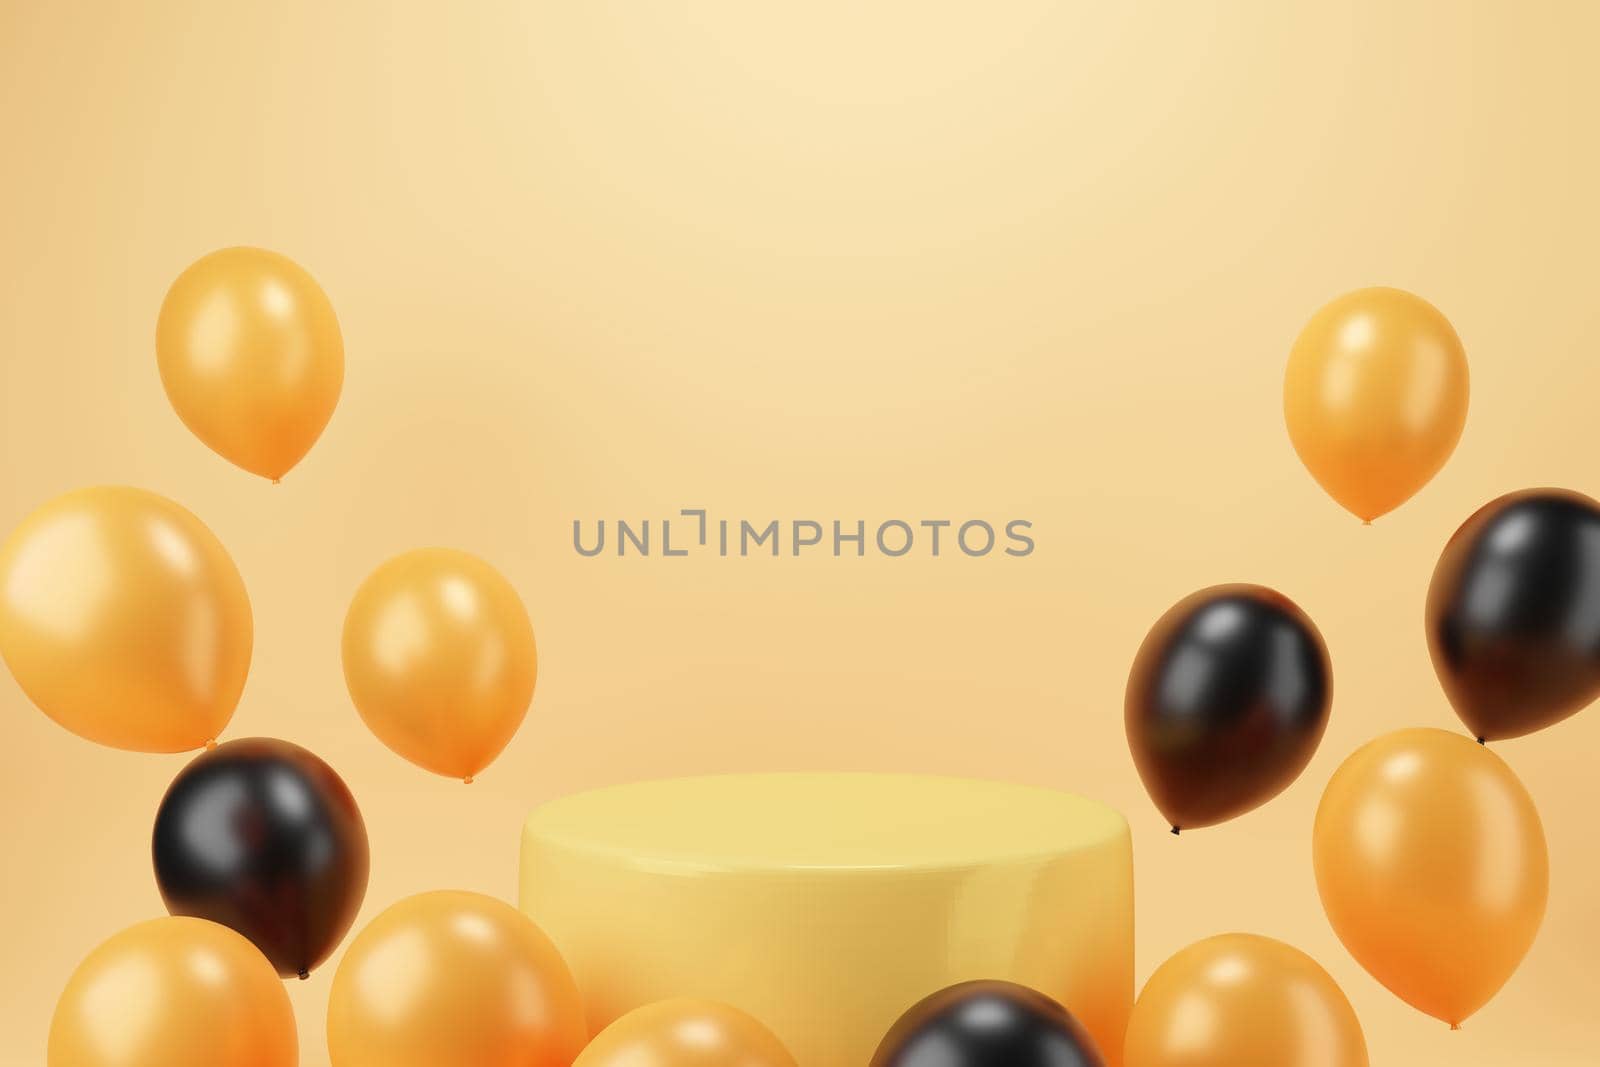 Podium on orange bacckground with balloons for Halloween. by ijeab